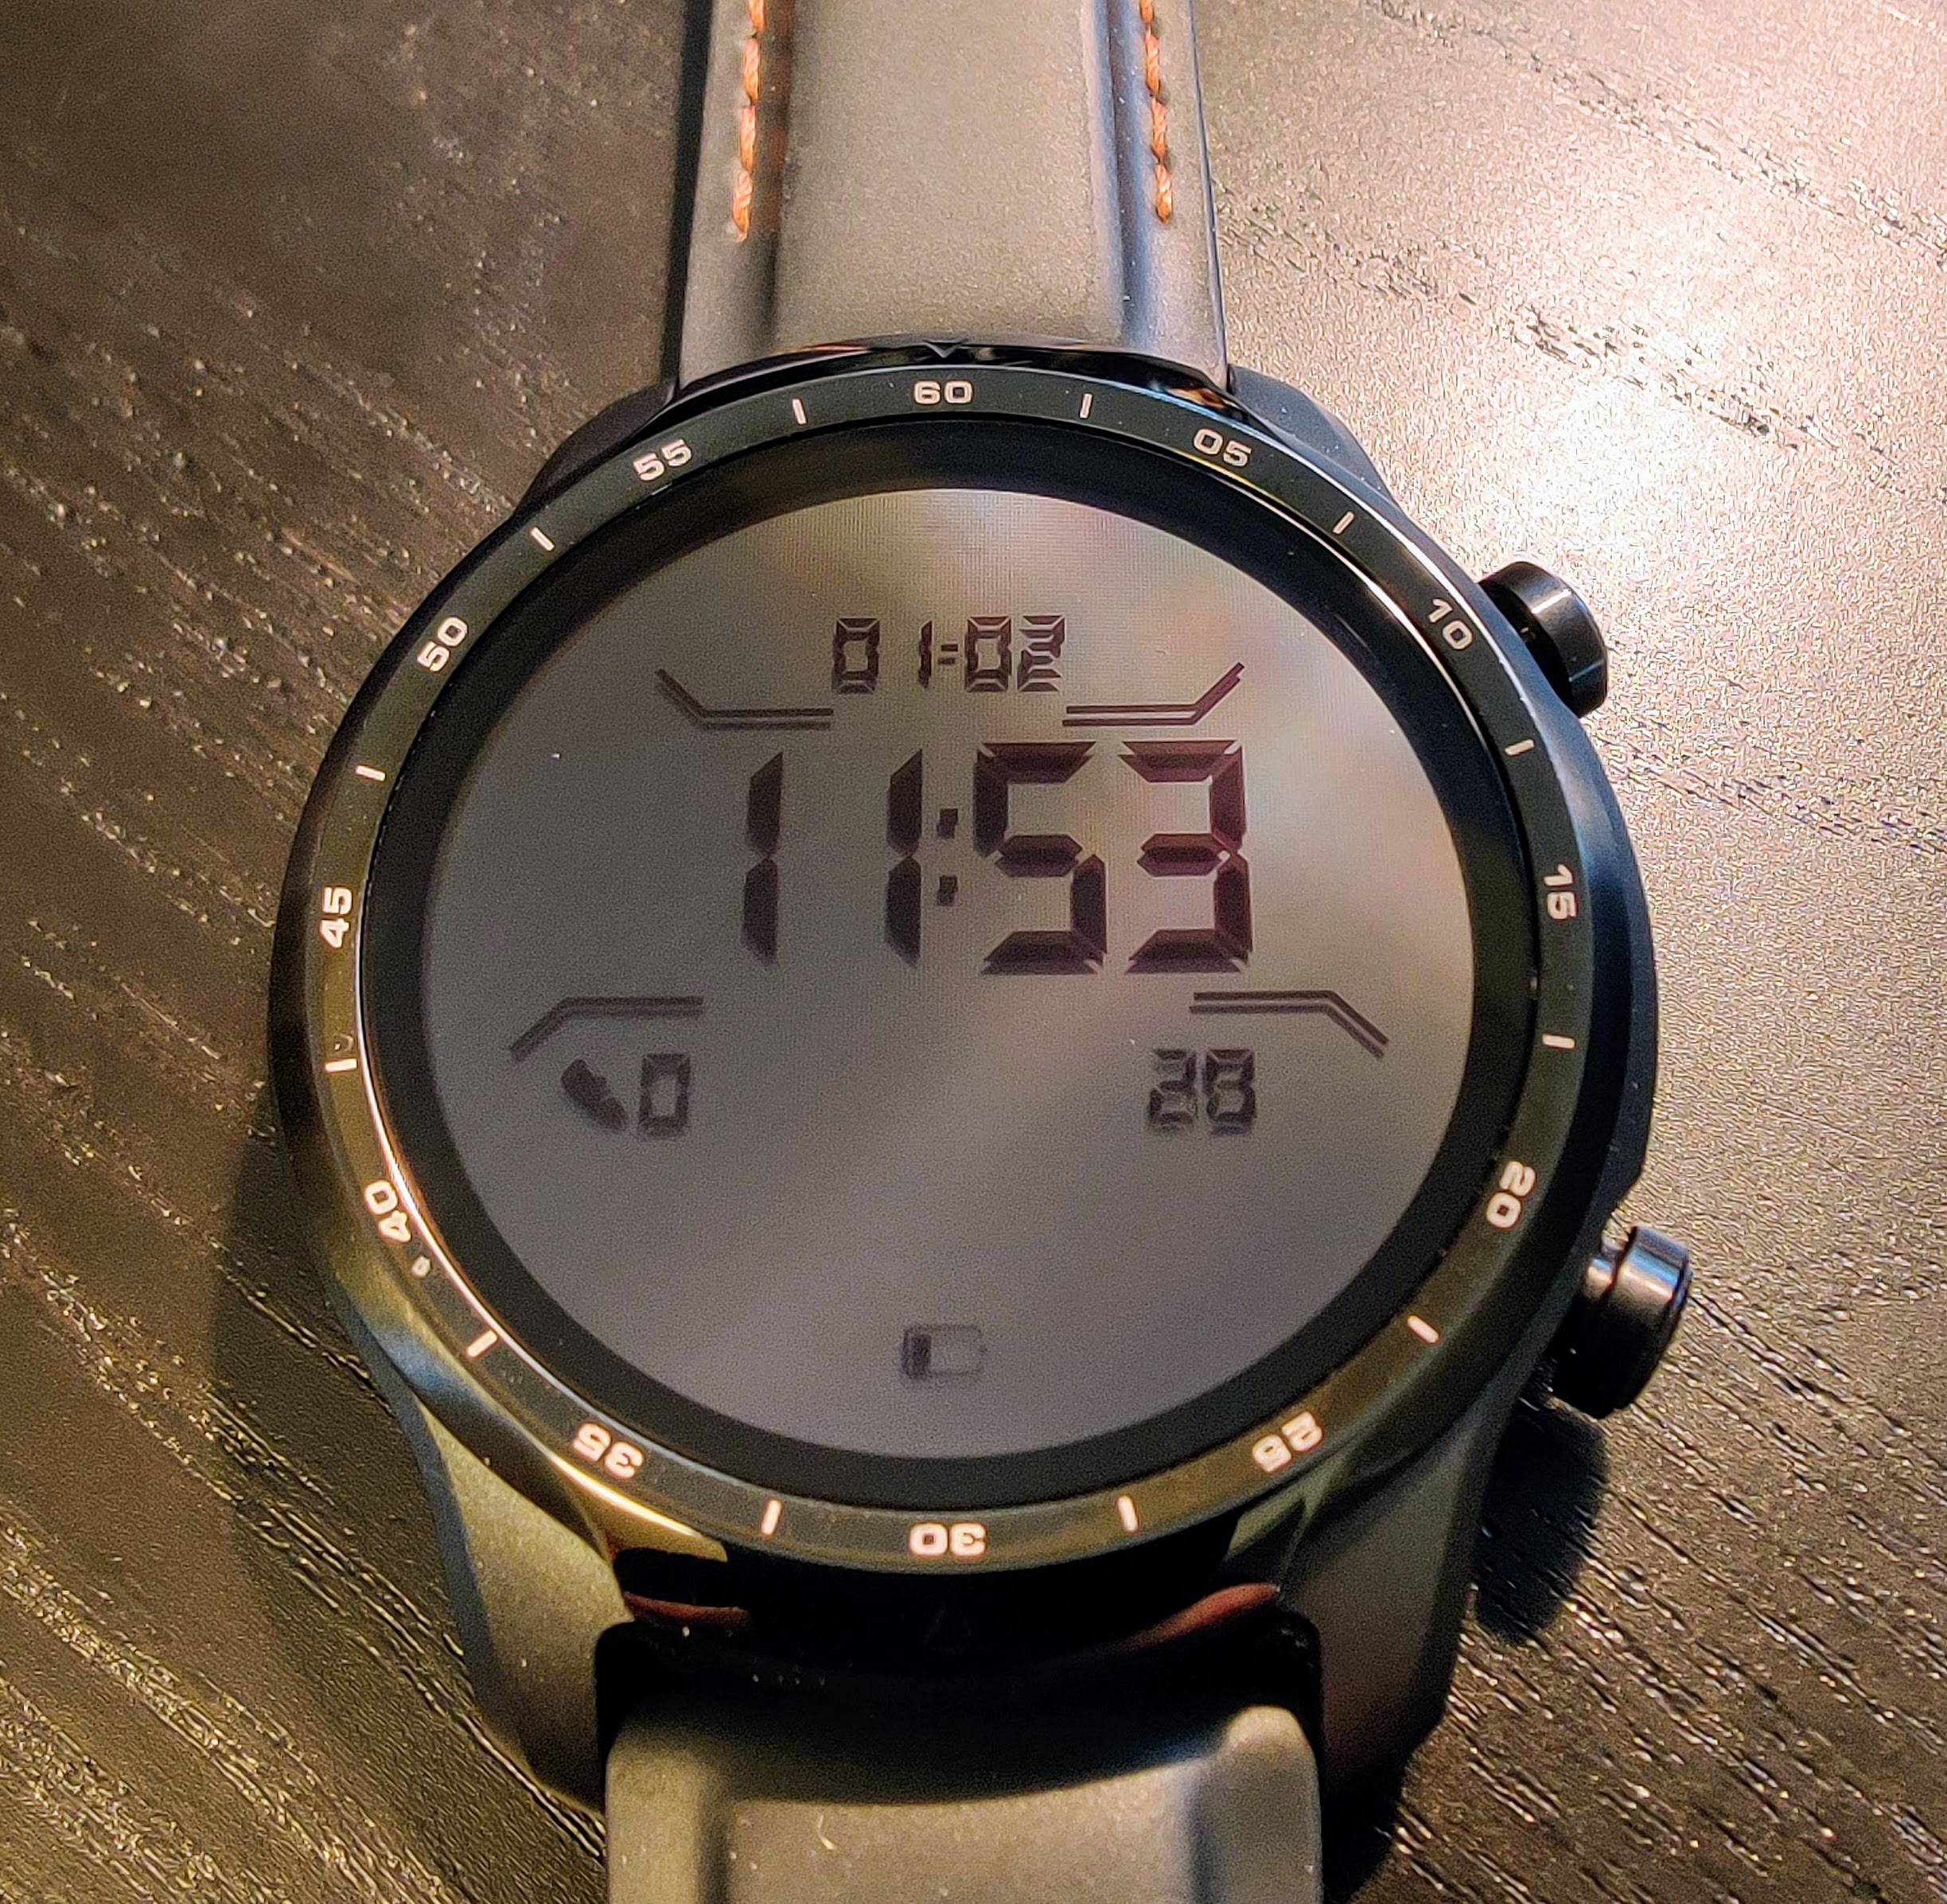 My TicWatch Pro 3 broke after a month